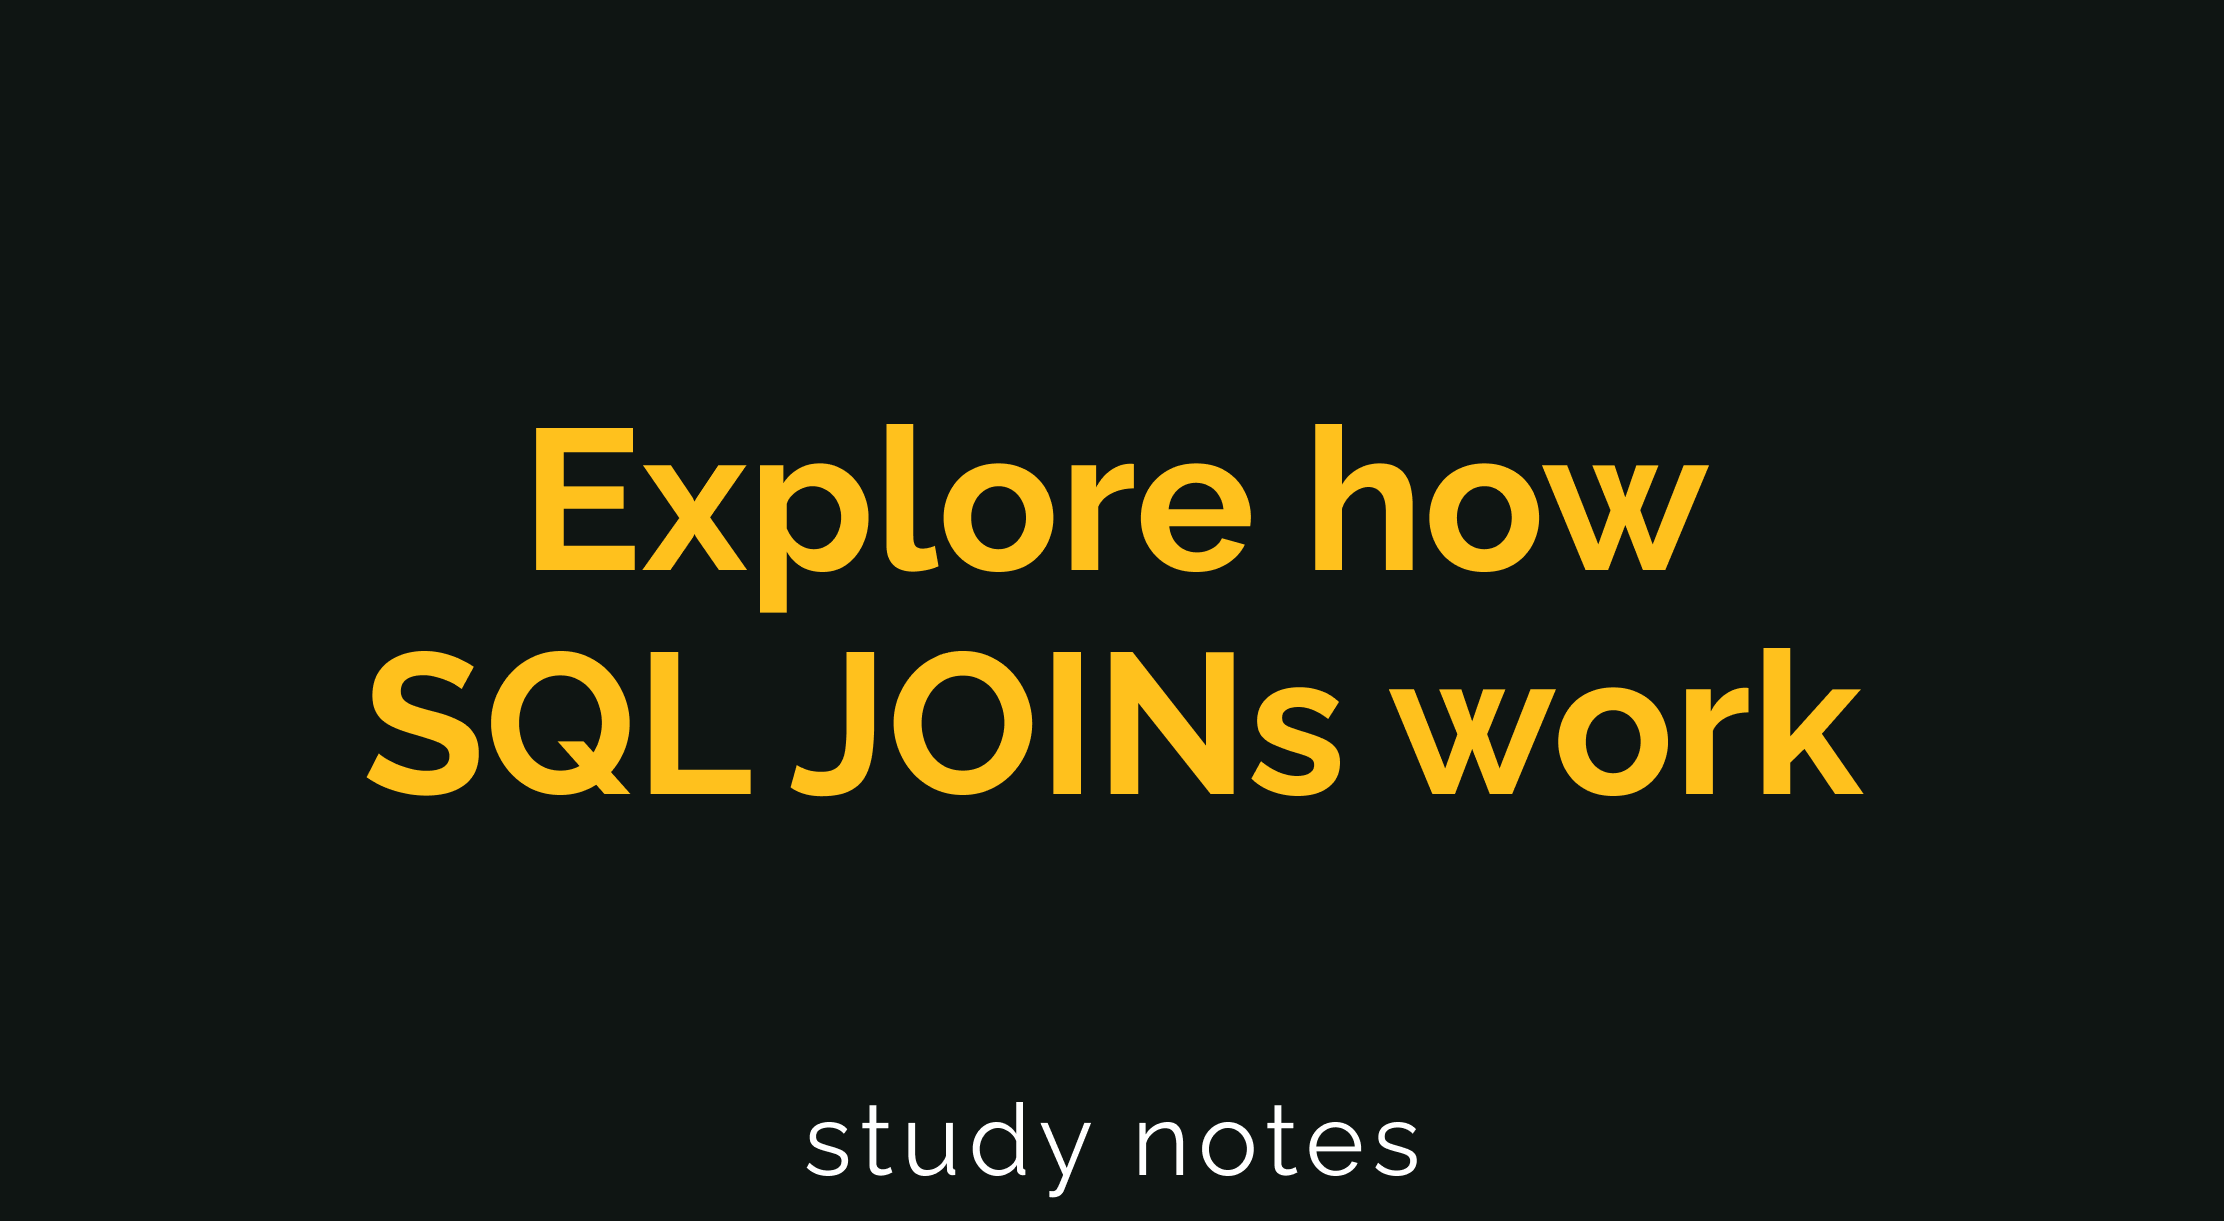 Explore how SQL JOINs work